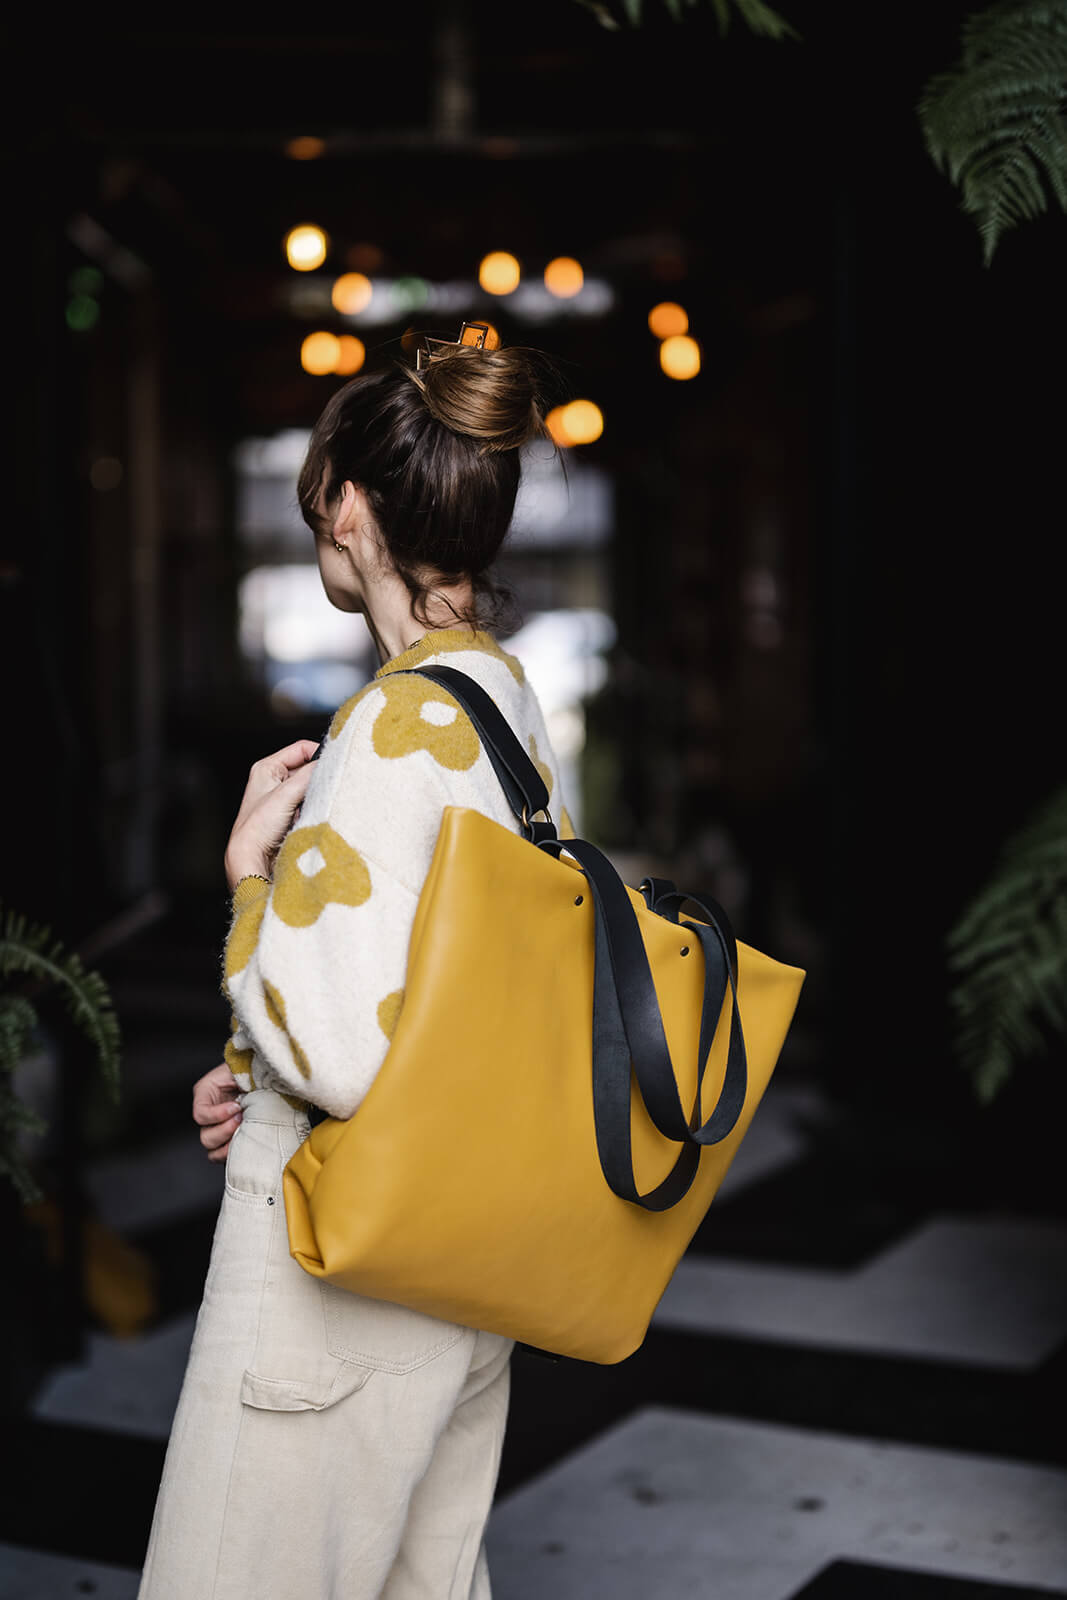 Woman with dark hair up in a bun and wearing beige and yellow pants and jumper. Her back is turned and she is modelling a yellow leather backpack and tote as a backpack on her left shoulder. The straps are black leather. The bag is an Ella Jackson Yellow Leather Backpack & Tote